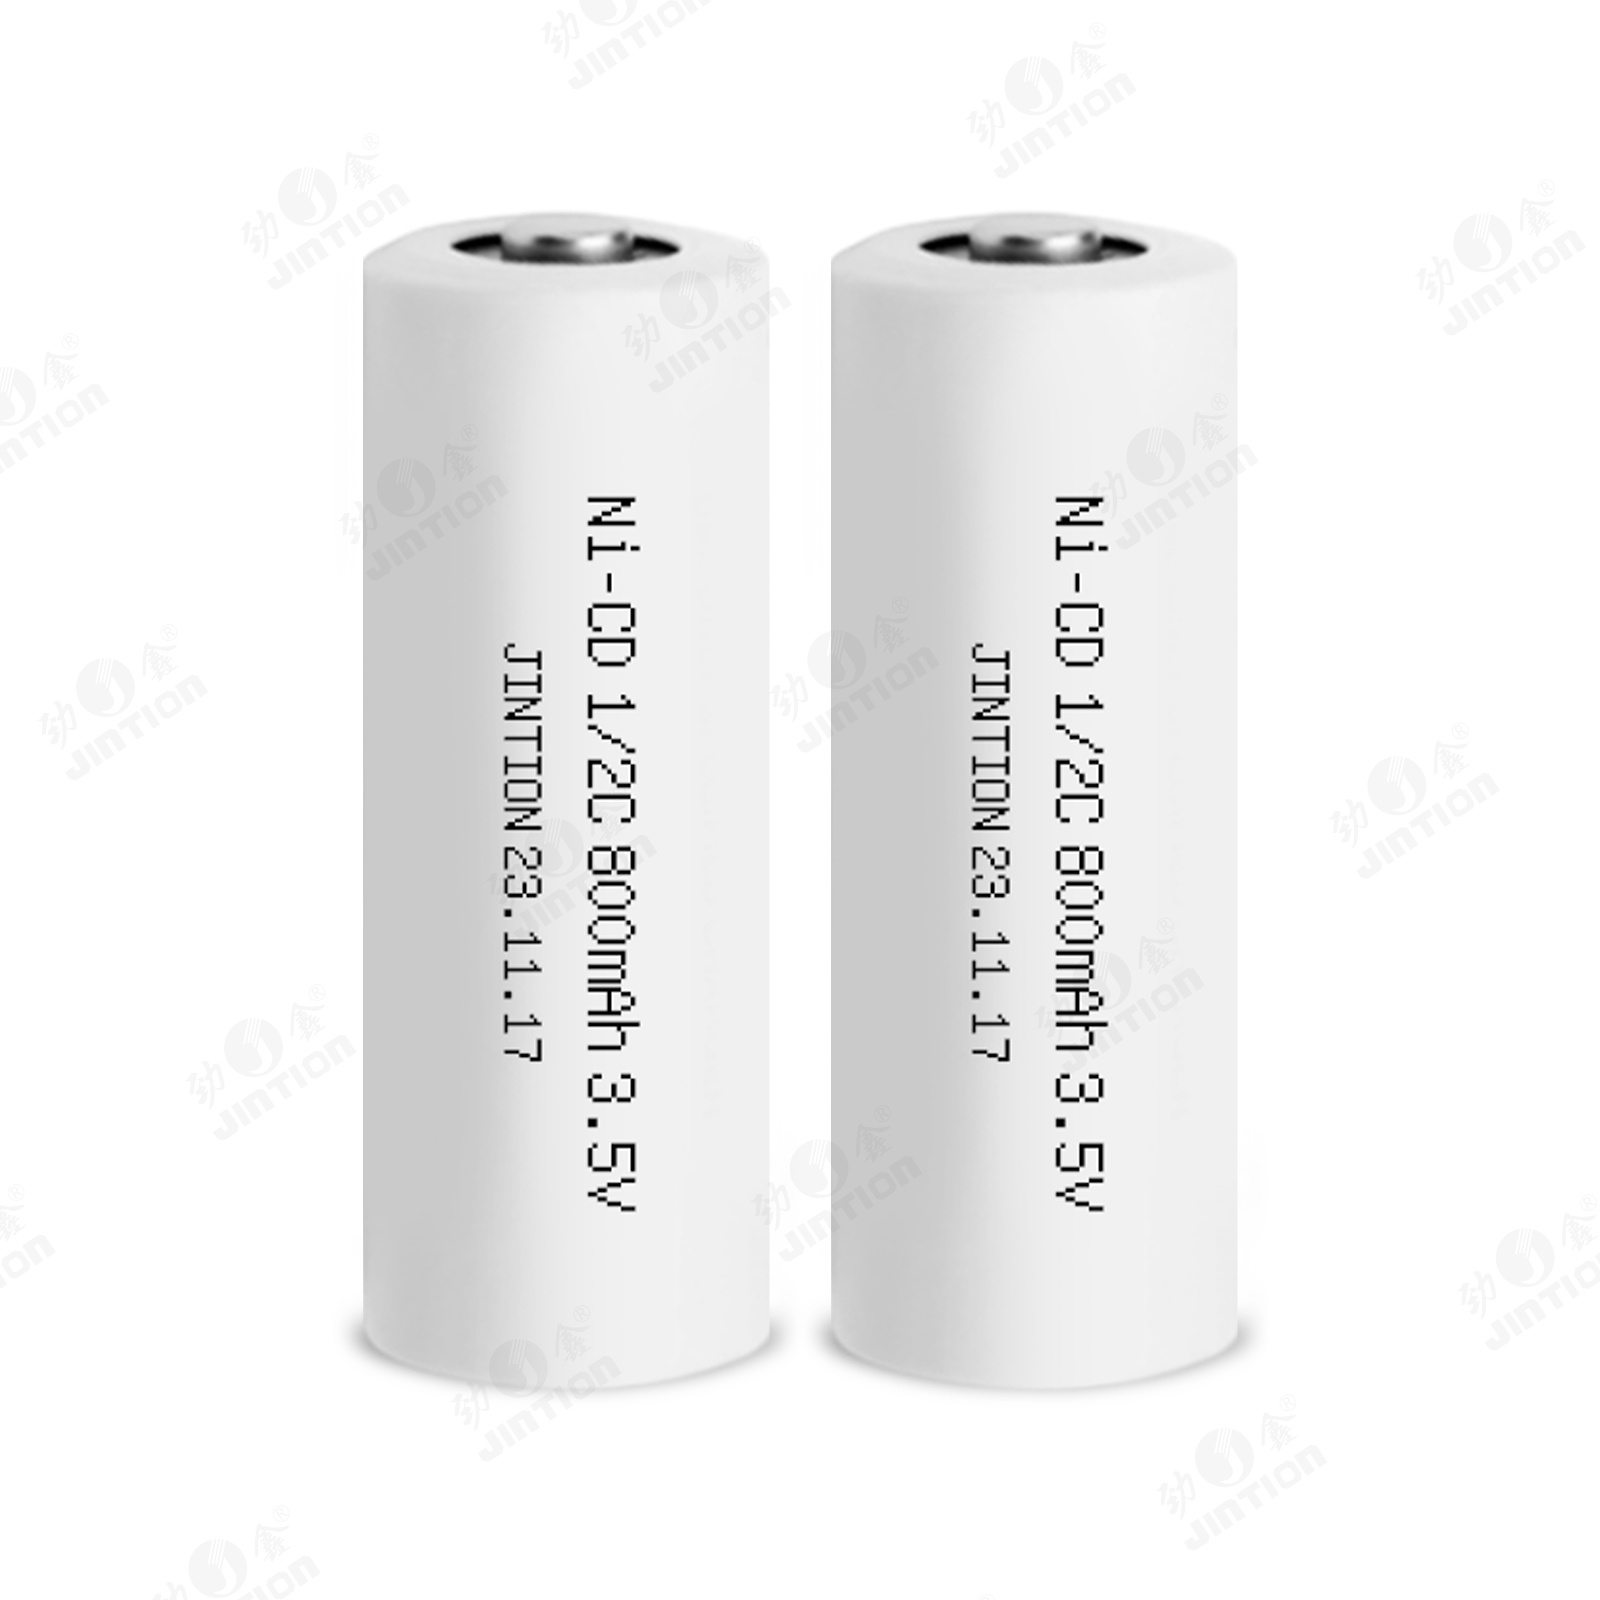 JINTION NICD 1/2C 800MAH 3.5V nicd battery pack 3.6 v nickel cadmium batteries nicd for Welch Allyn 72300 Otoscopes